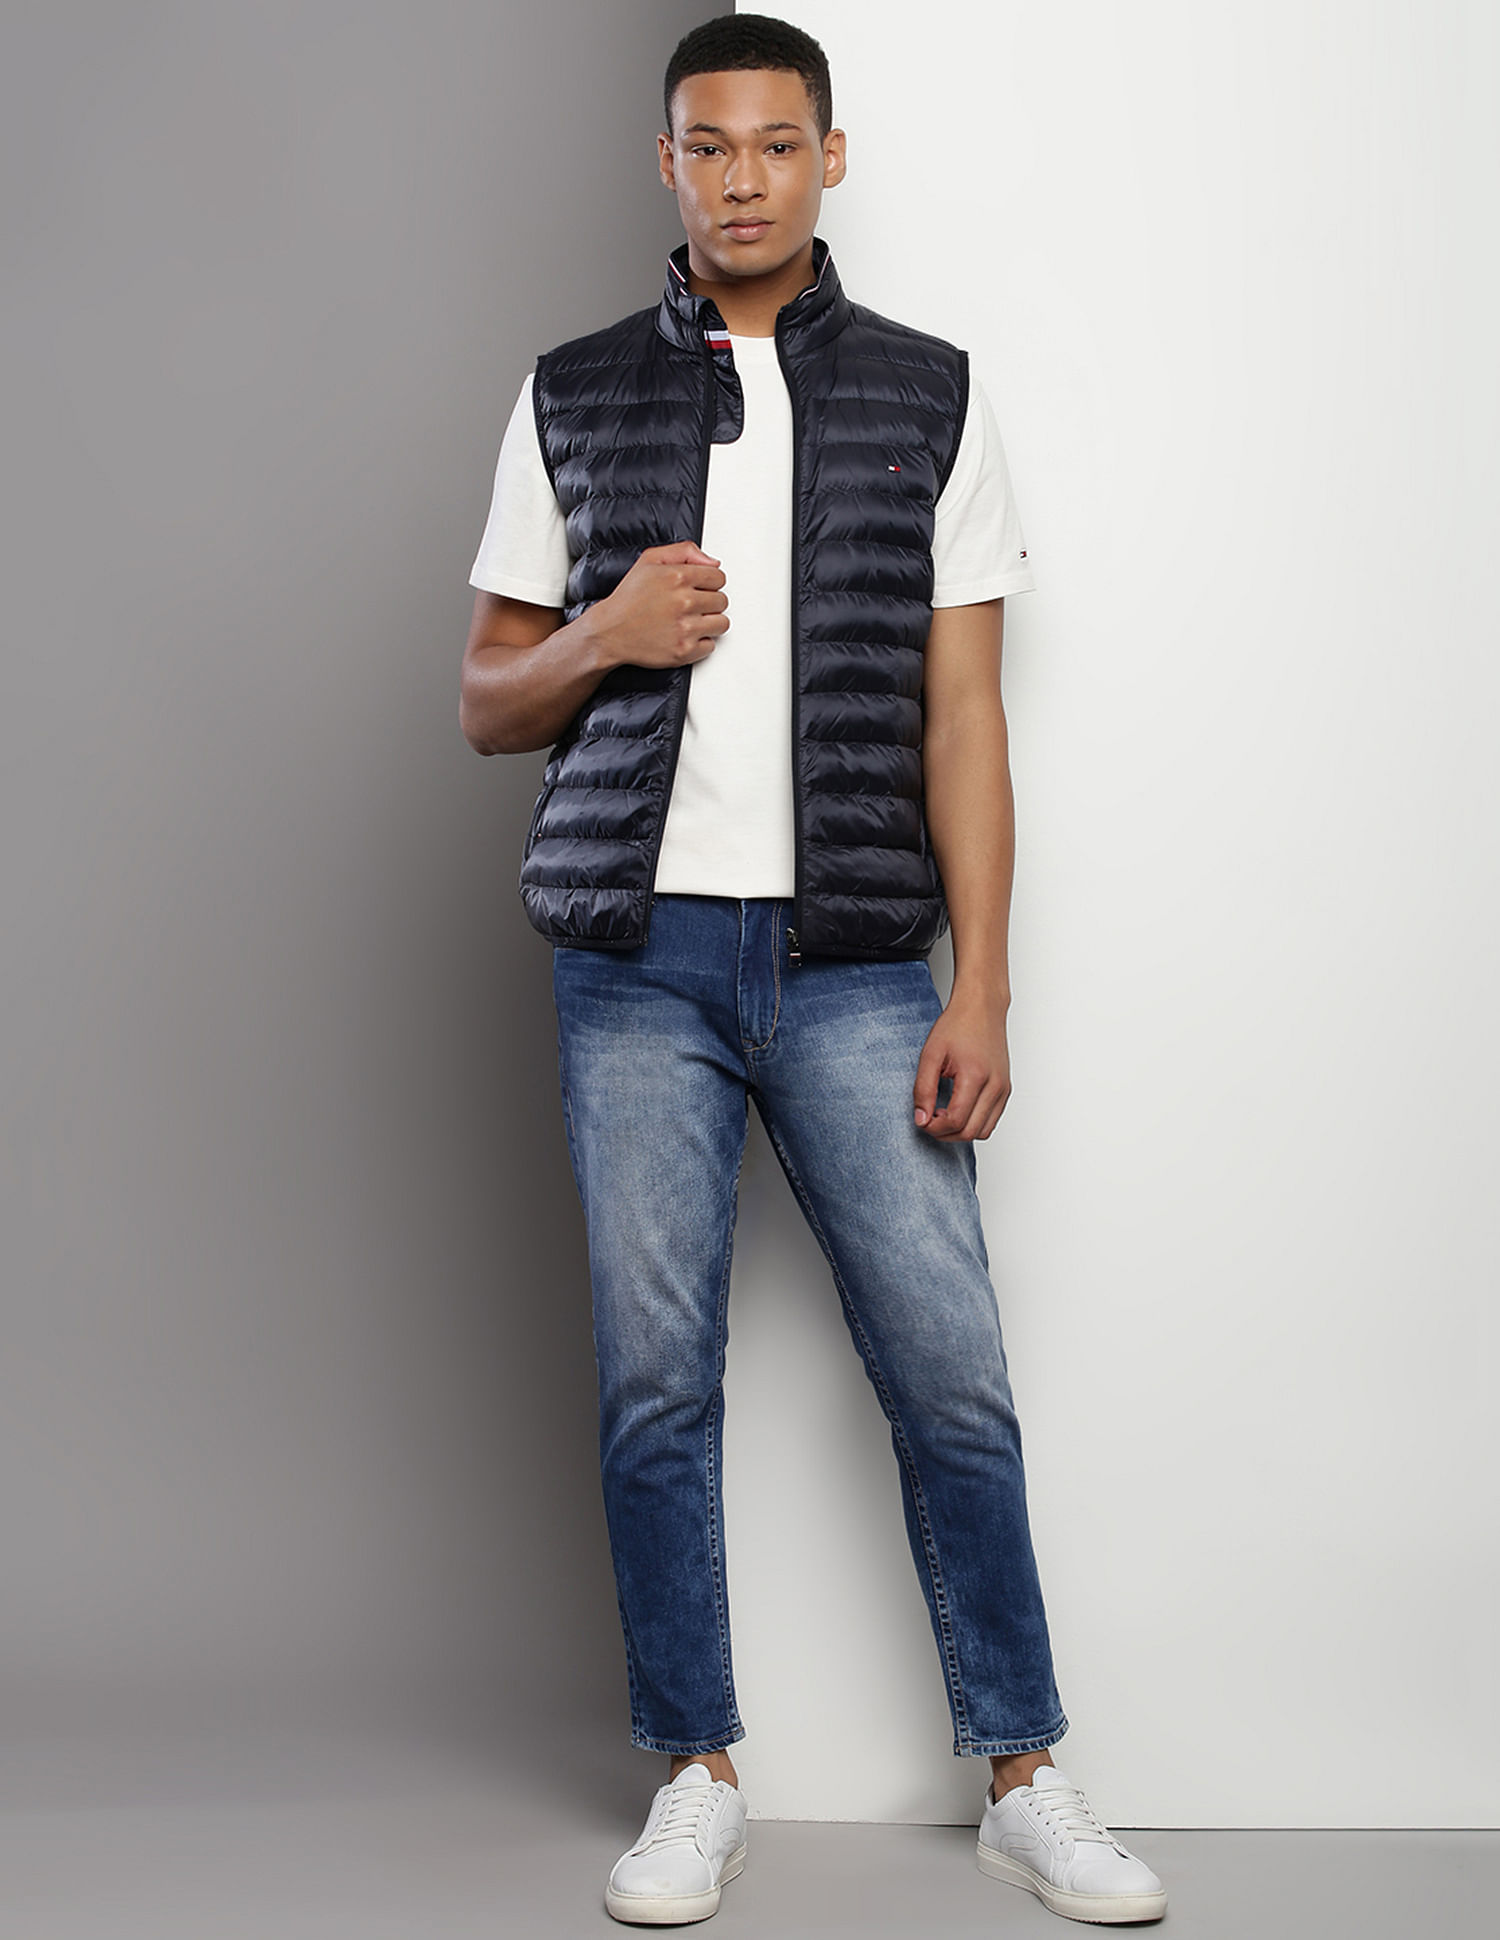 Buy Tommy Hilfiger Recycled Polyester Sleeveless Jacket - NNNOW.com